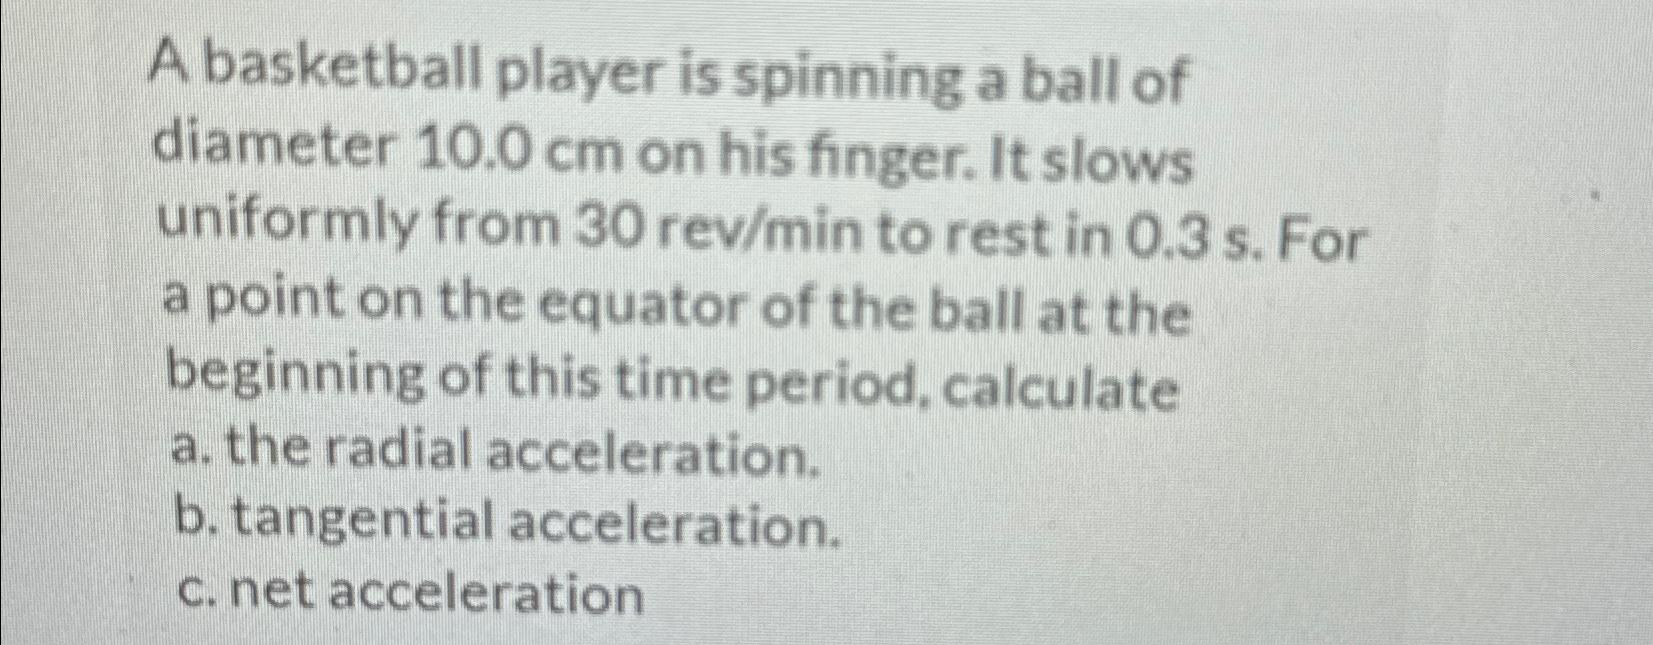 A basketball player is spinning a ball of diameter 10.0 cm on his finger. It slows uniformly from 30 rev/min